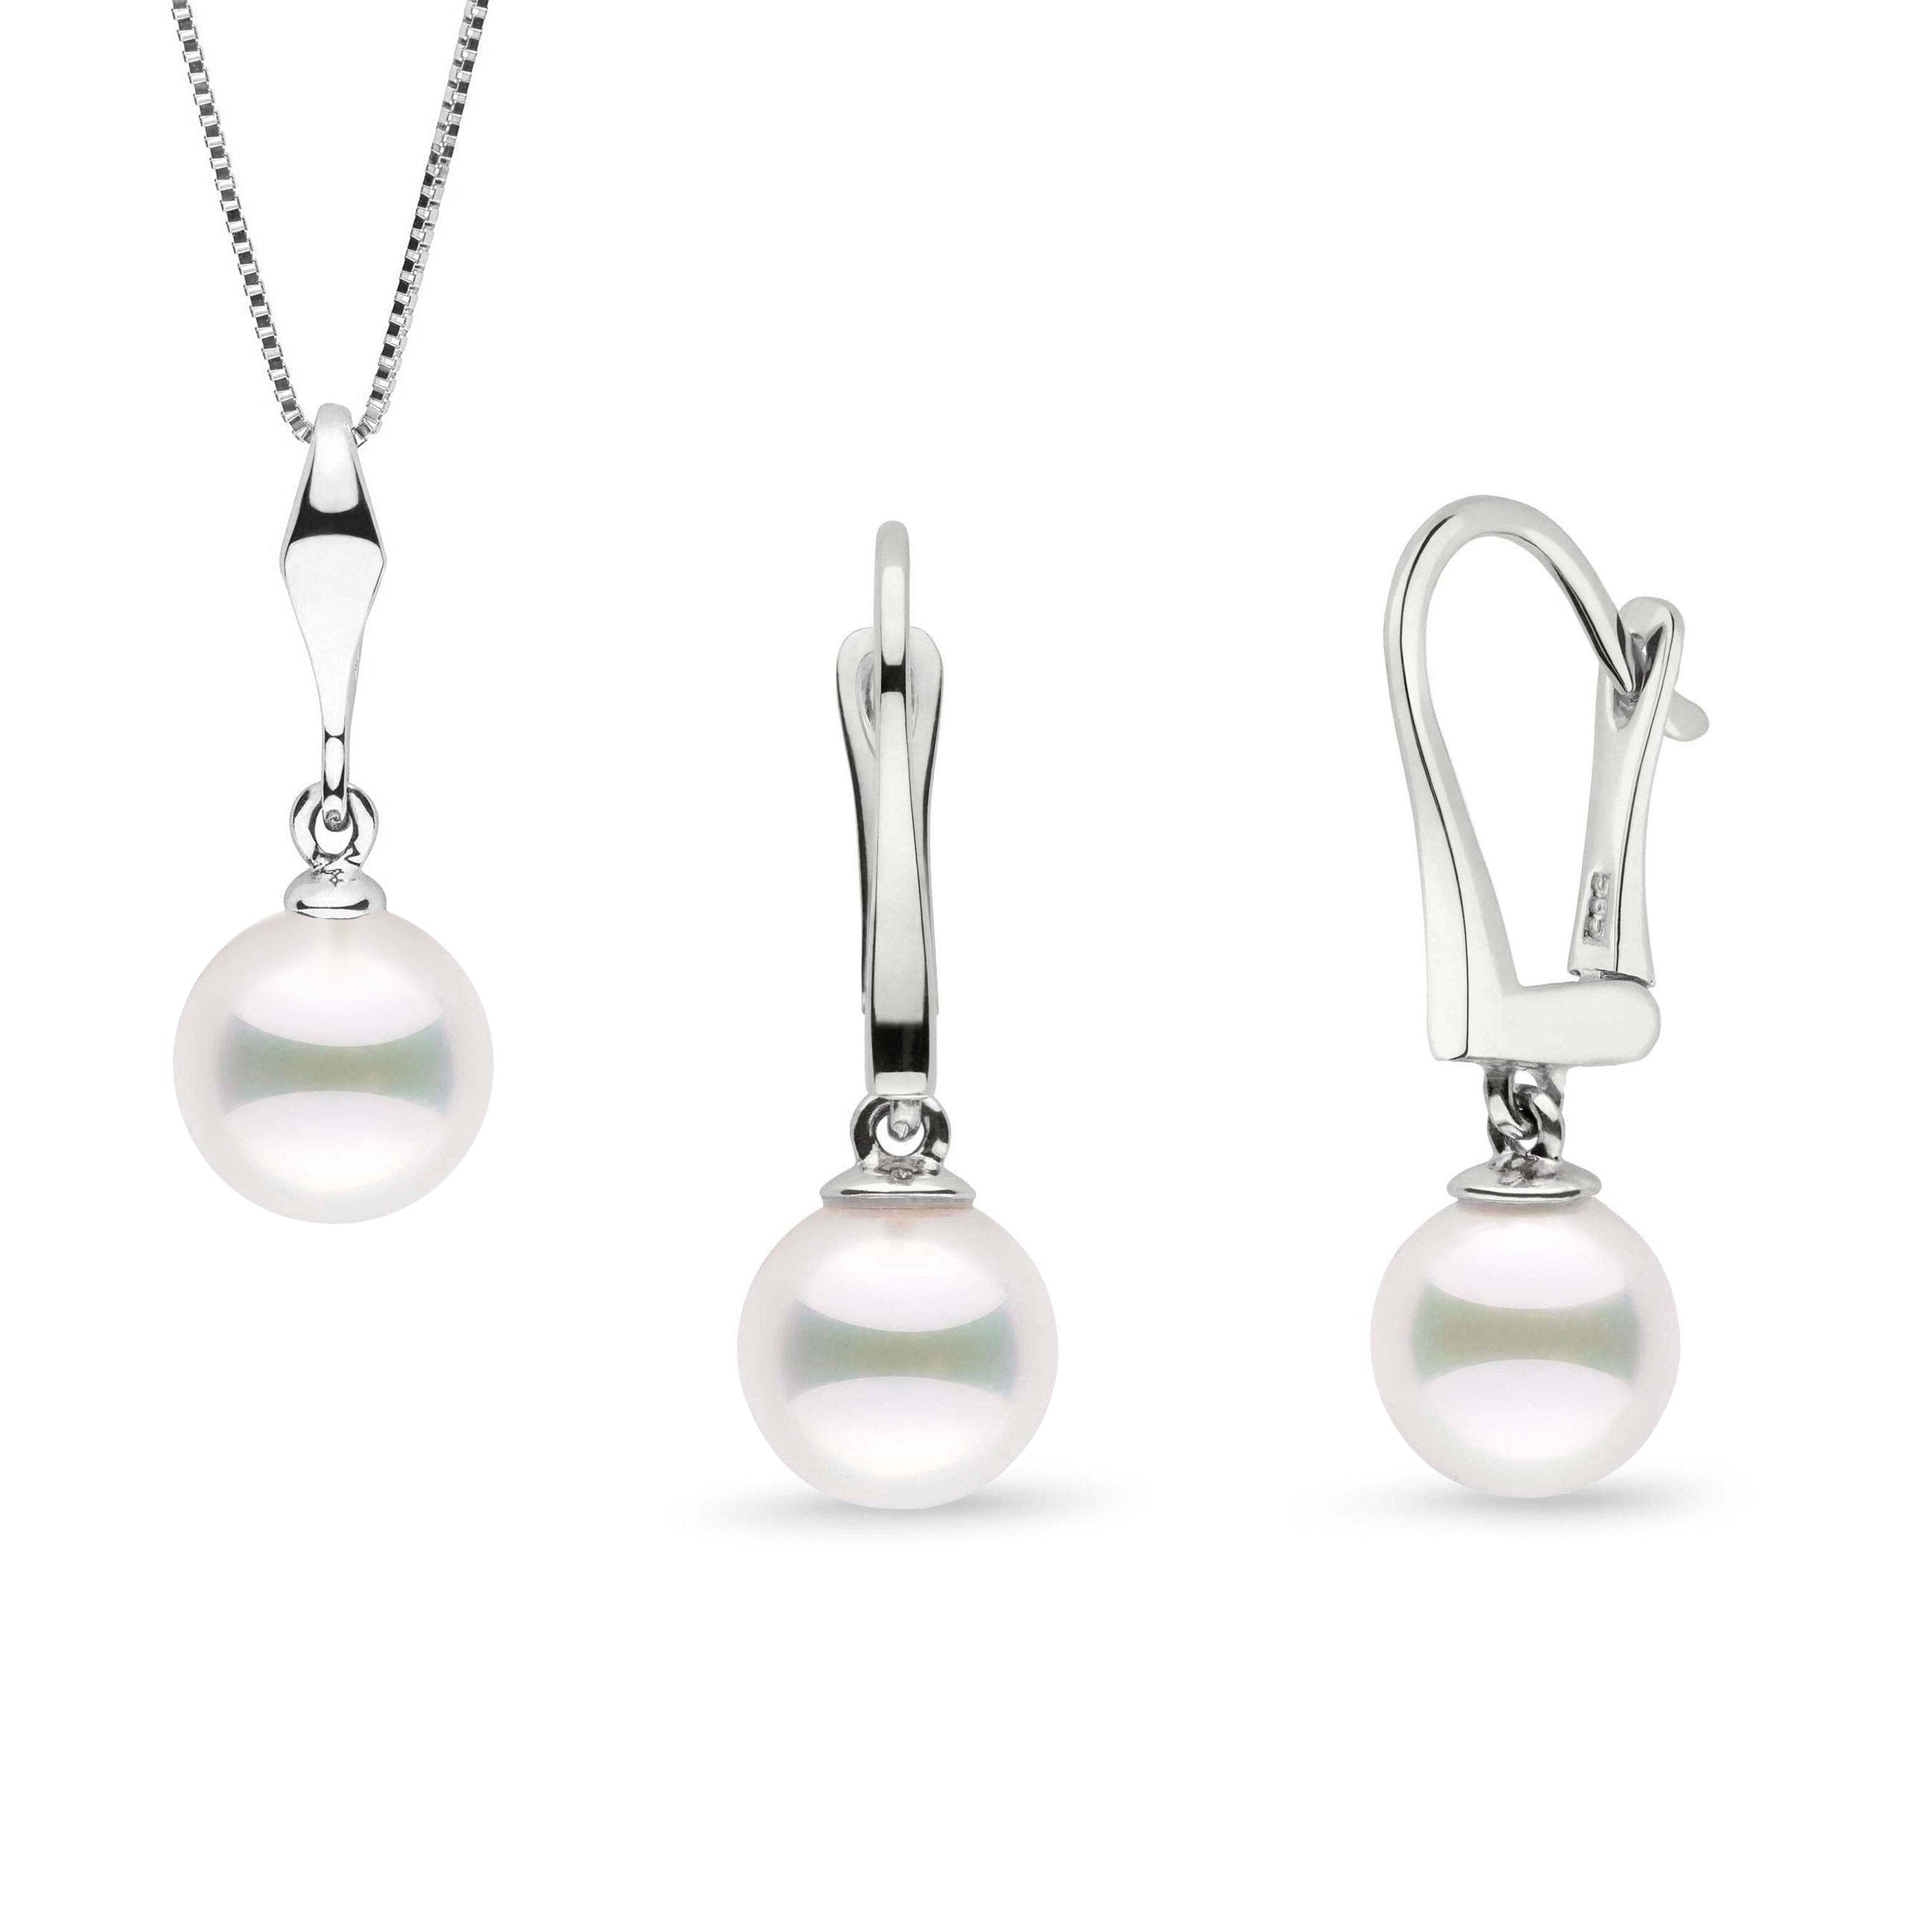 Essential Classic Collection 7.5-8.0 mm Akoya Pearl Pendant and Earrings Set